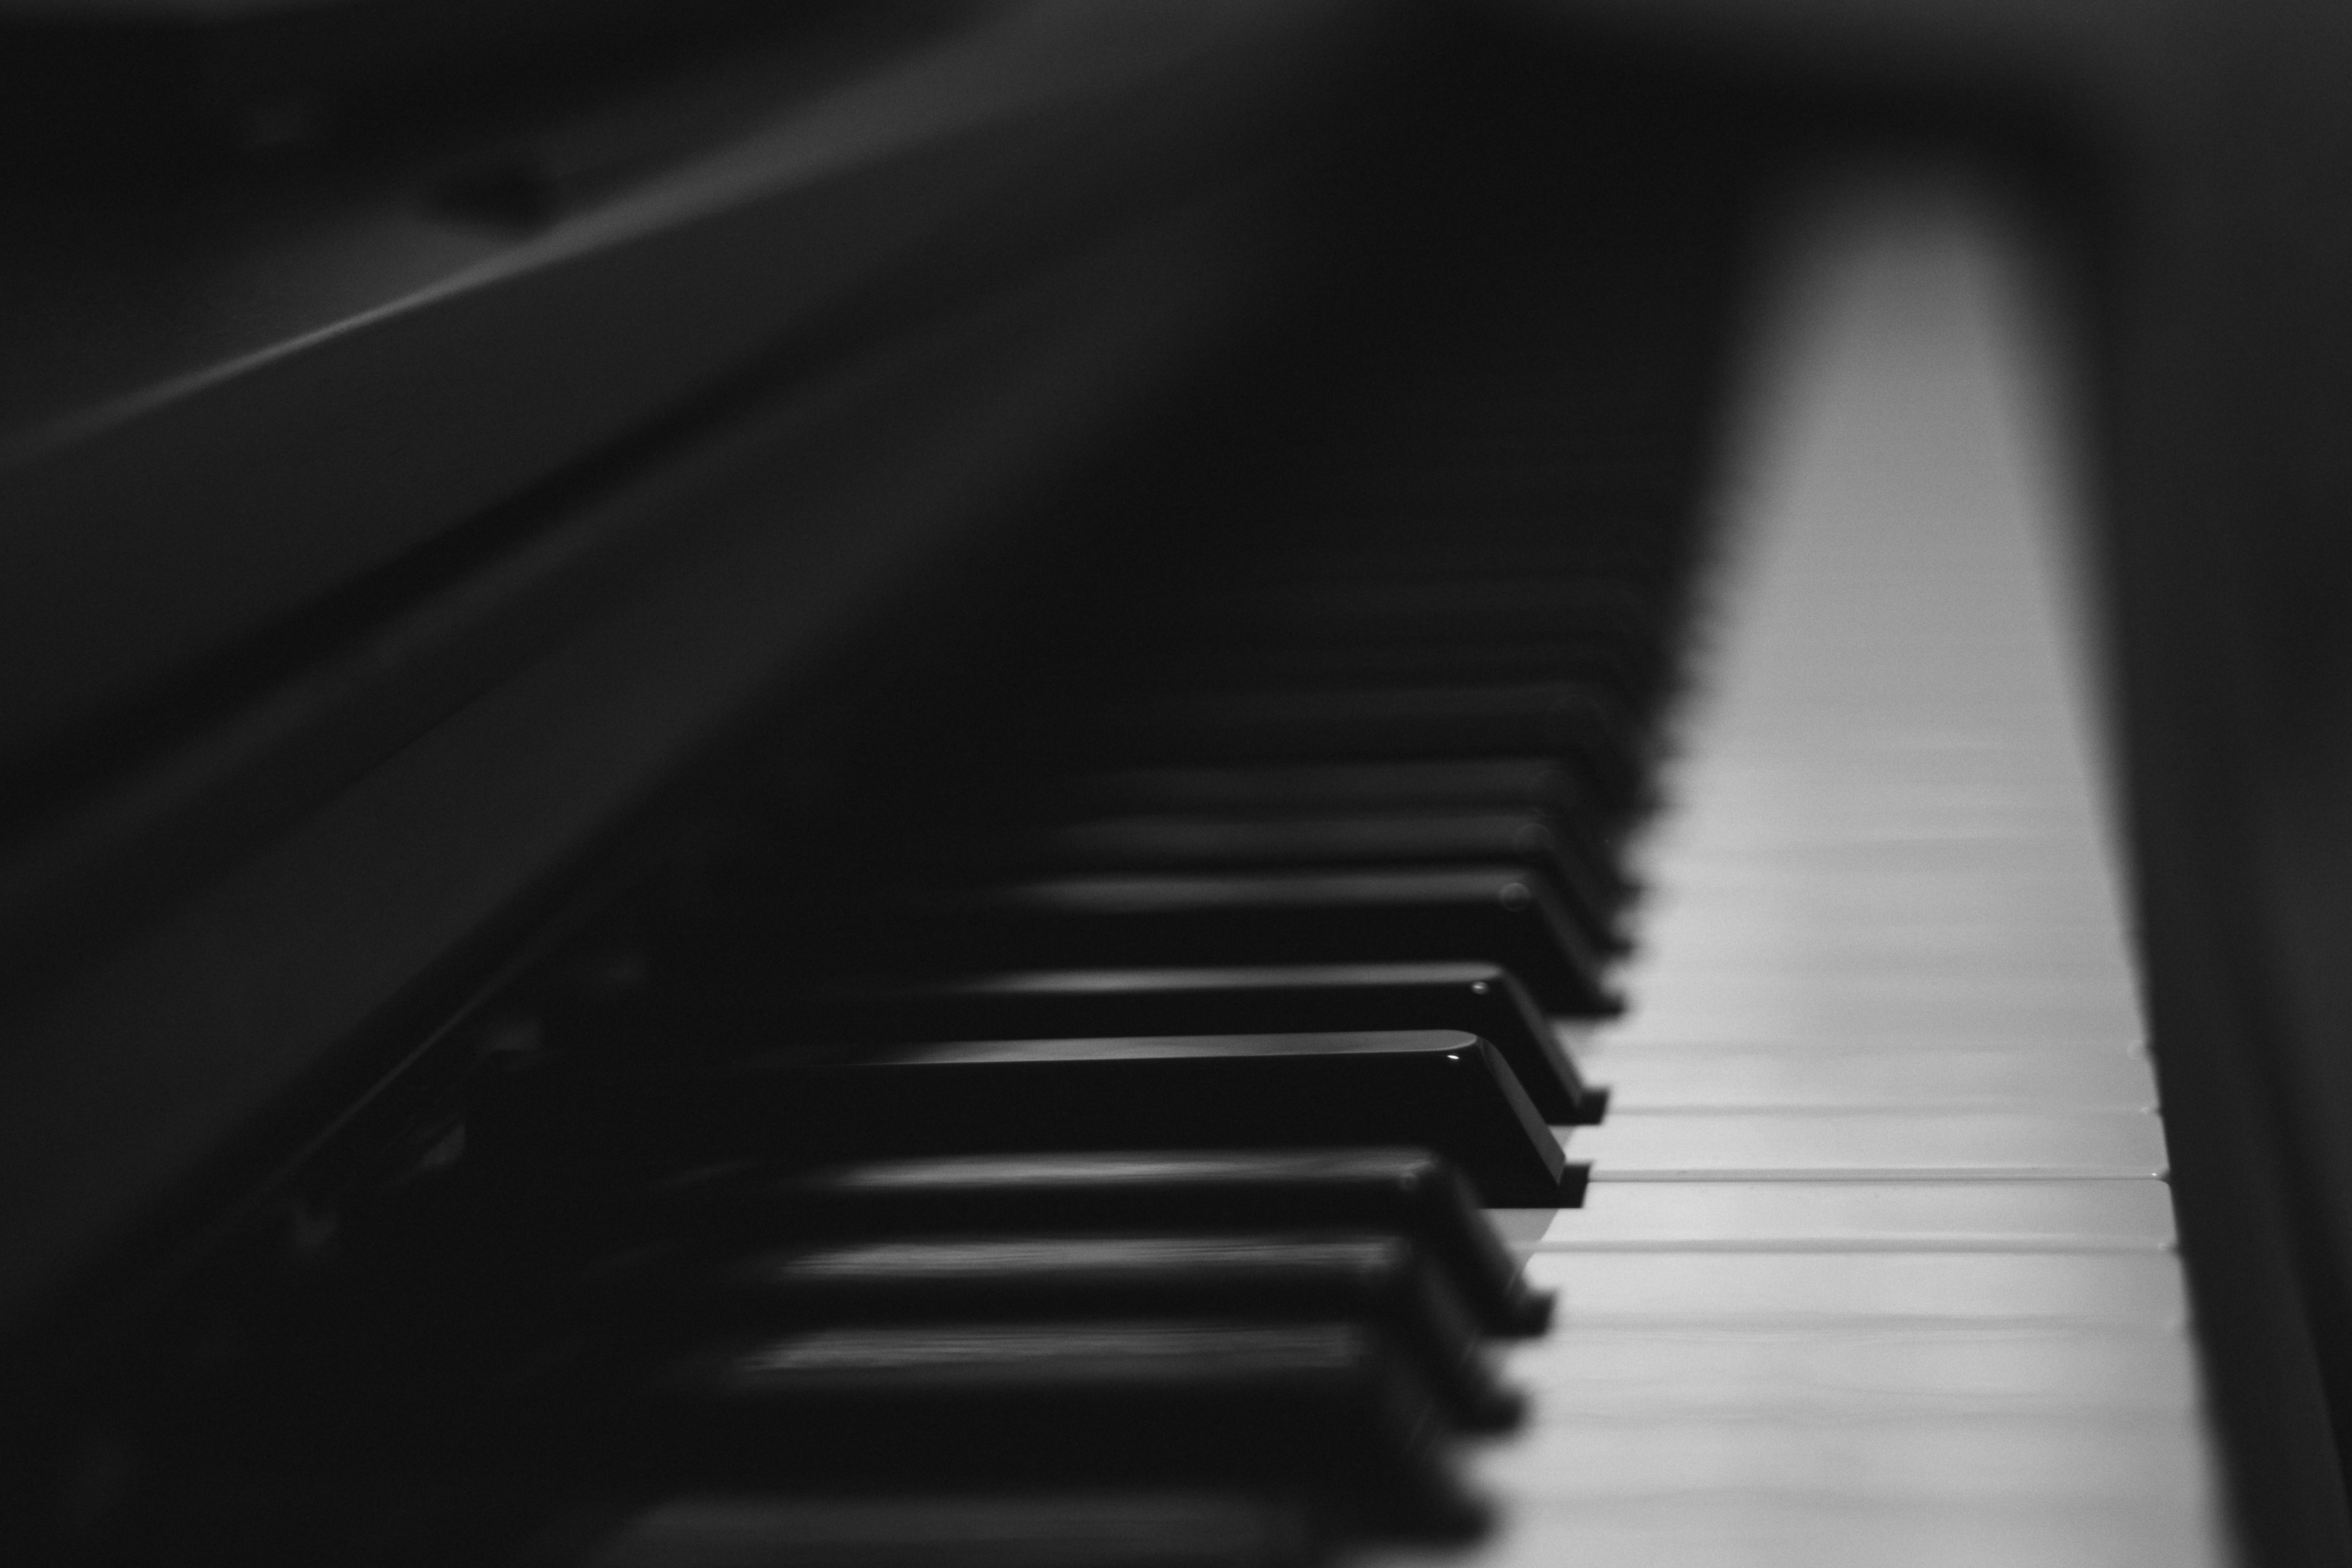 99521 download wallpaper music, musical instrument, piano, bw, chb, keys screensavers and pictures for free